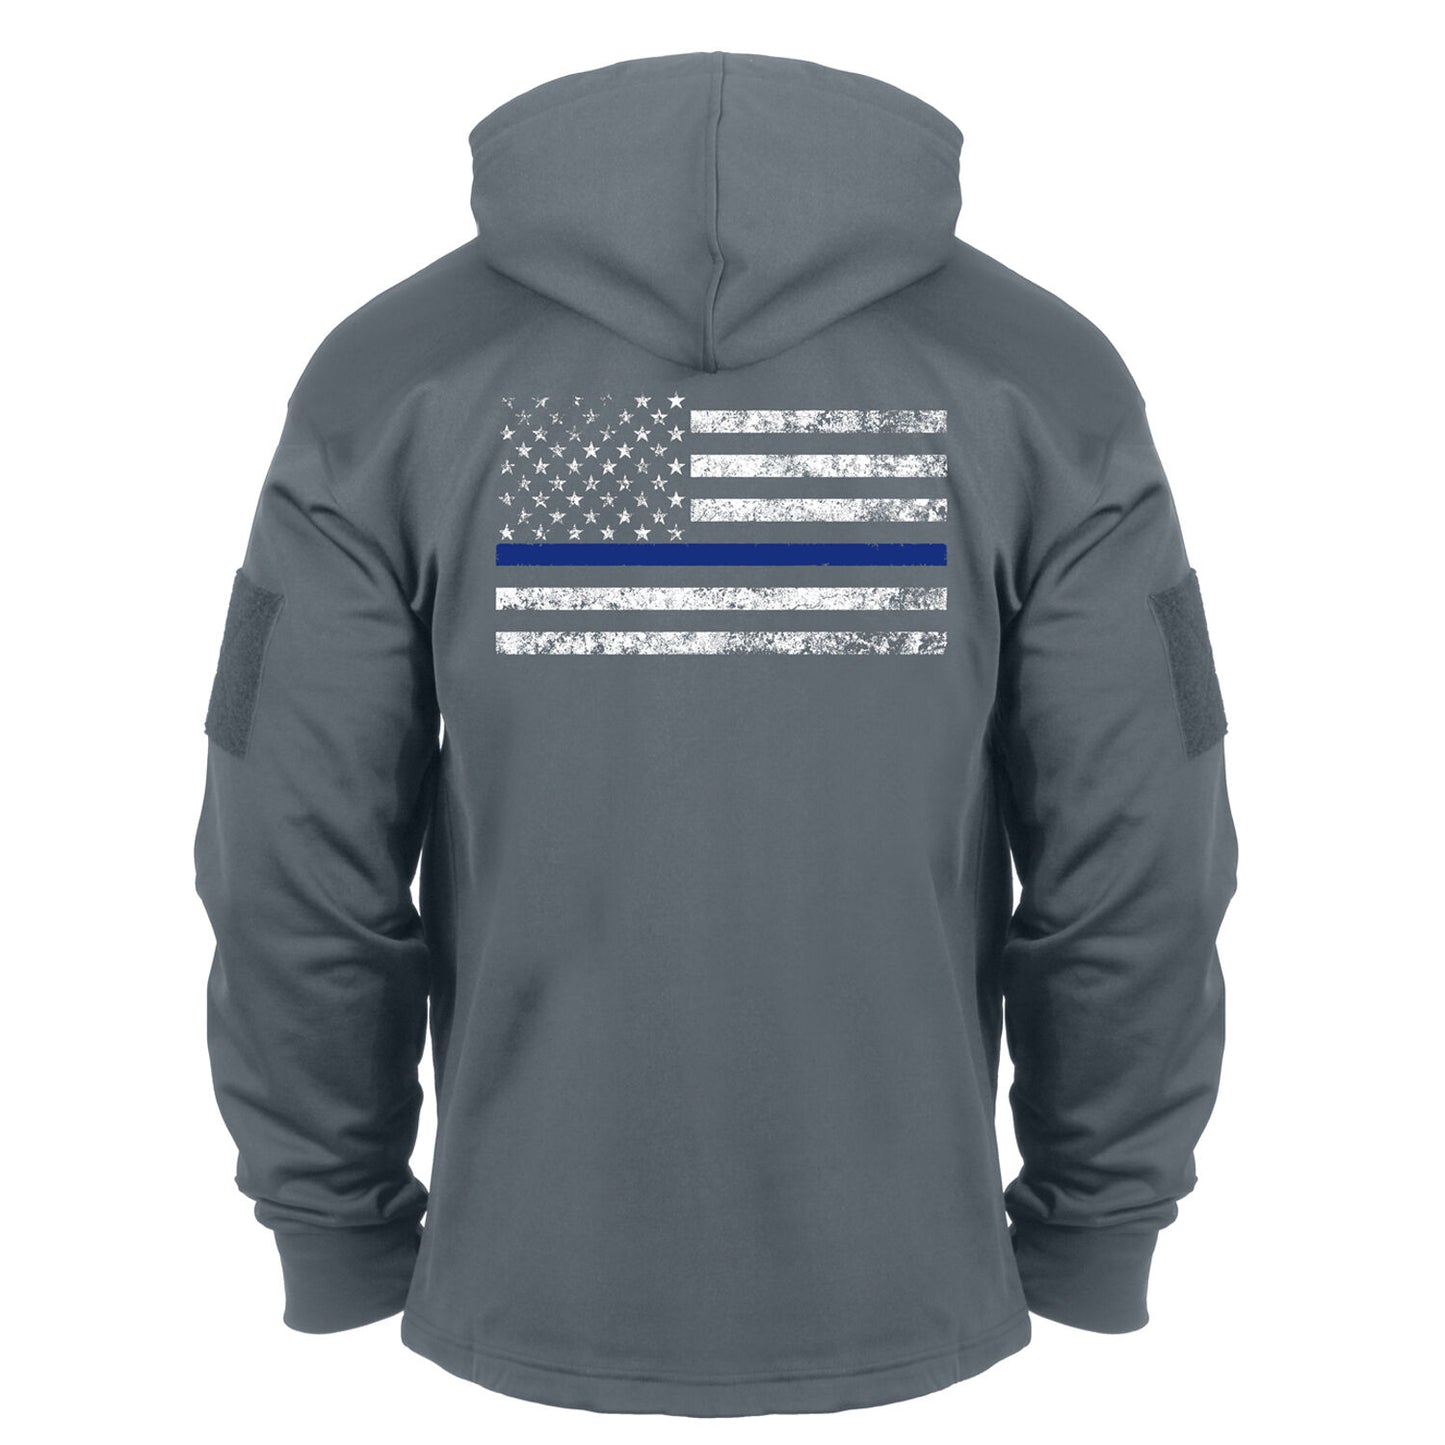 Rothco Thin Blue Line Concealed Carry Hoodie - Grey